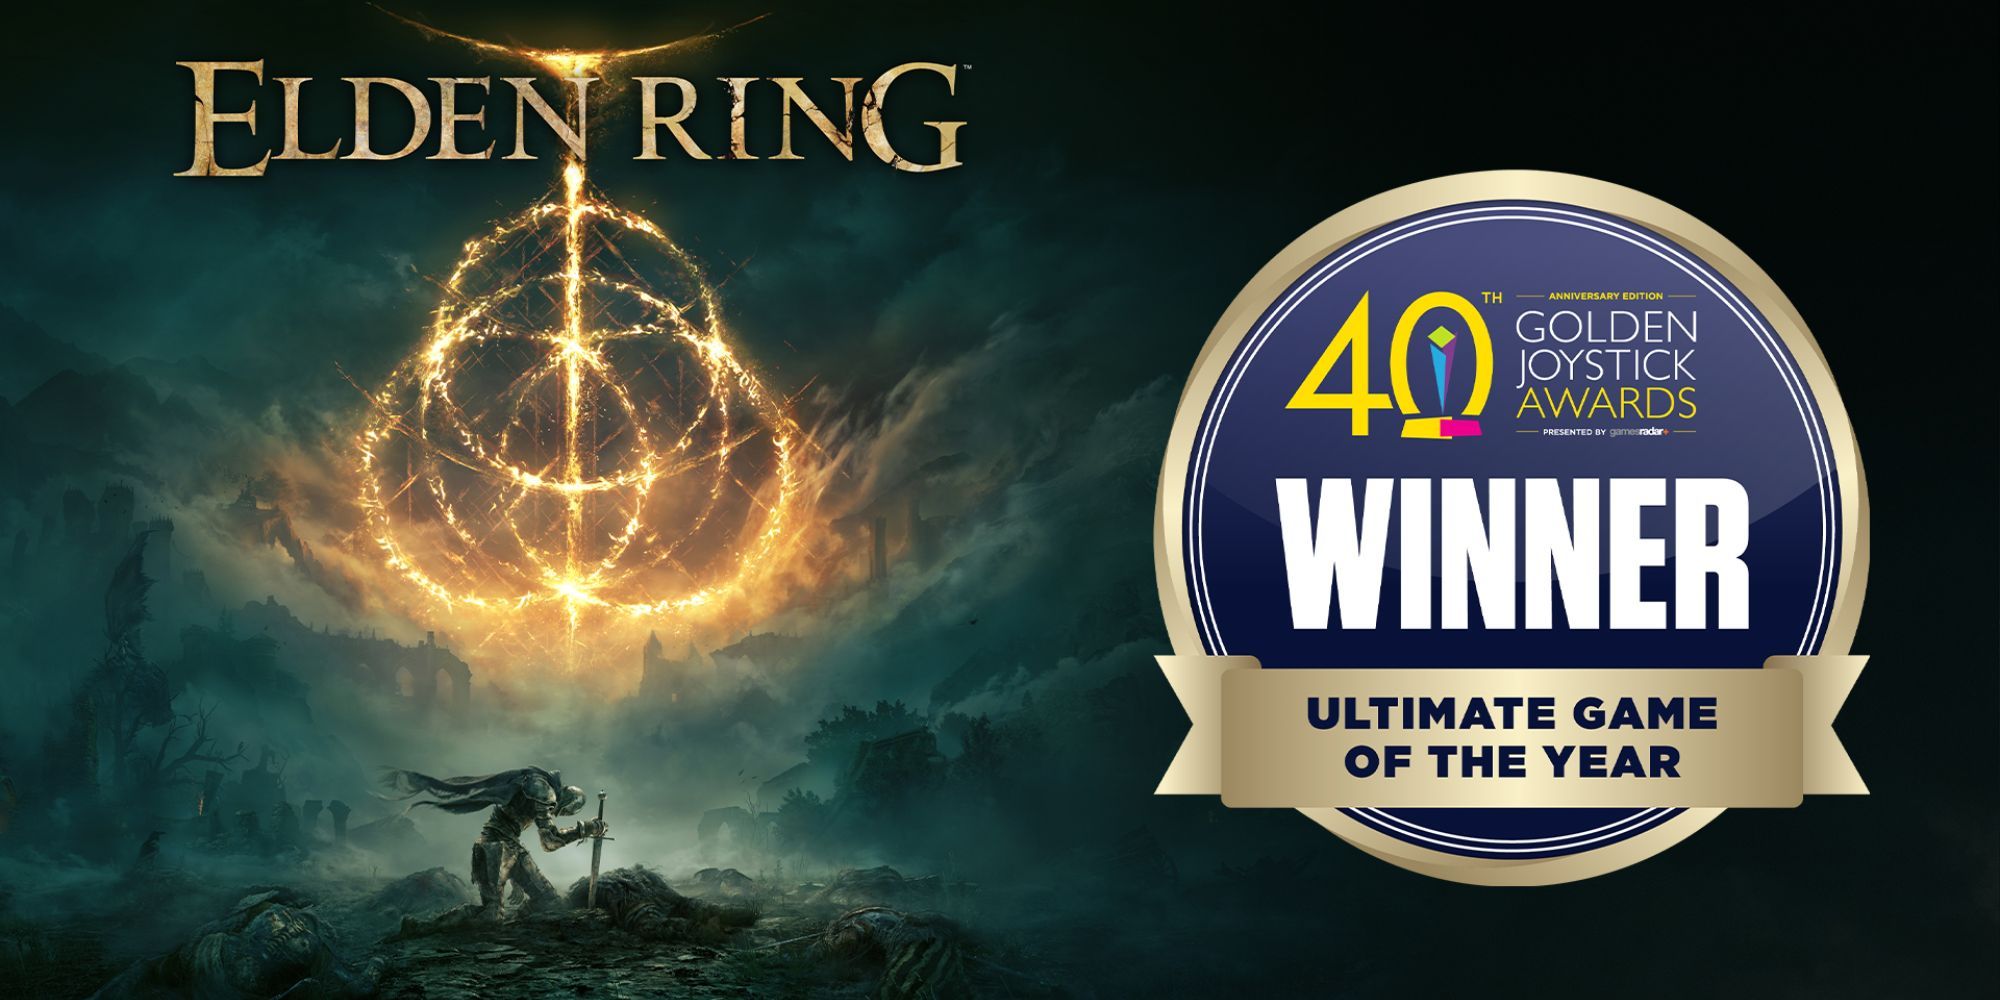 Elden Ring is the Game Of the Year and perfect to play at Christmas